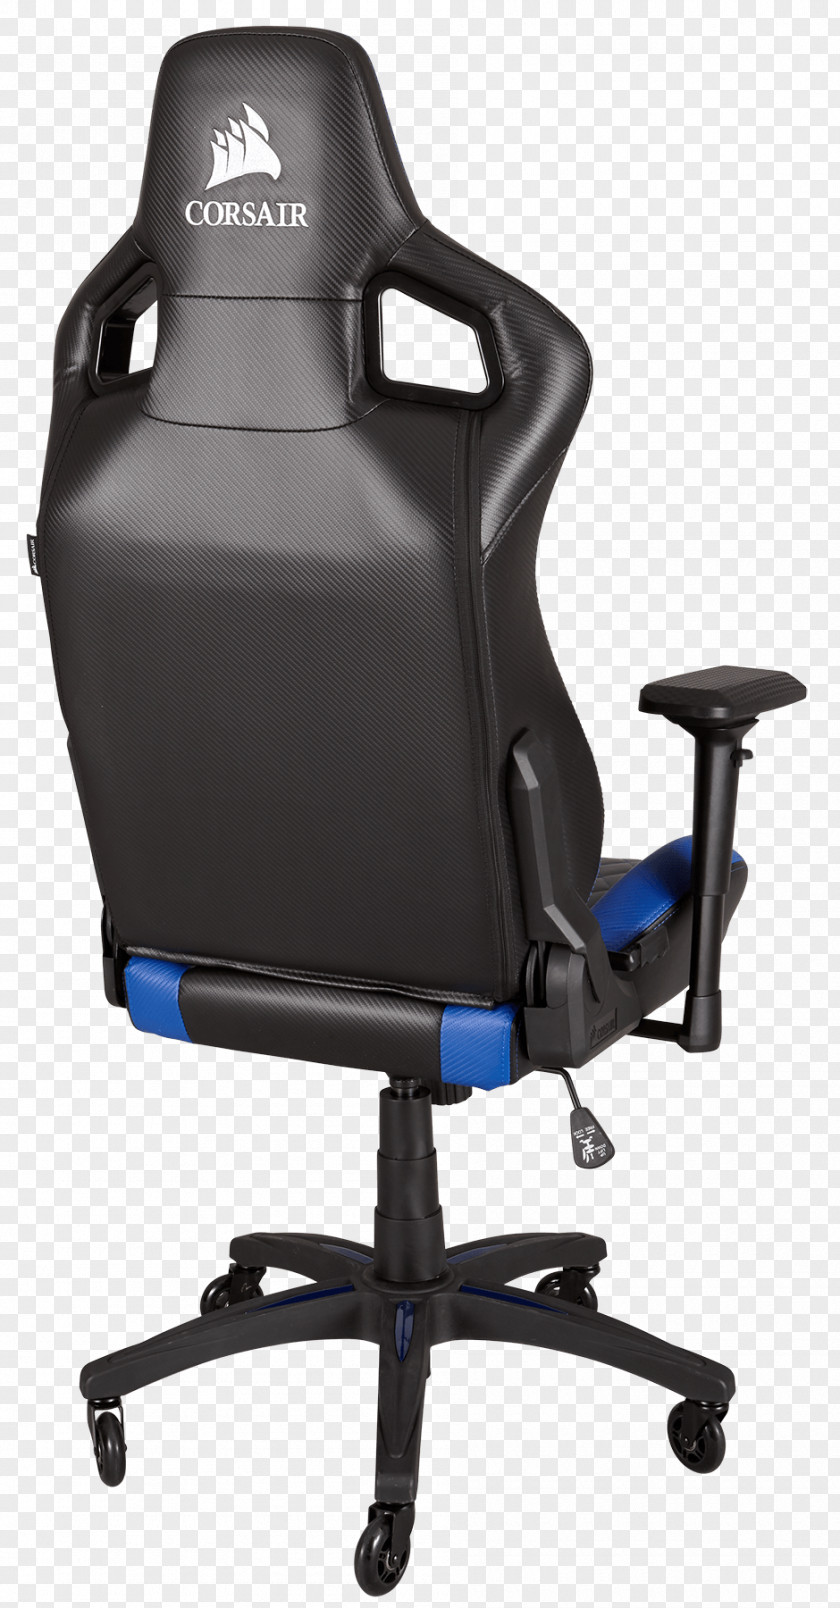 Skeleton Driving Gaming Chair Corsair Components Video Games Office & Desk Chairs PNG